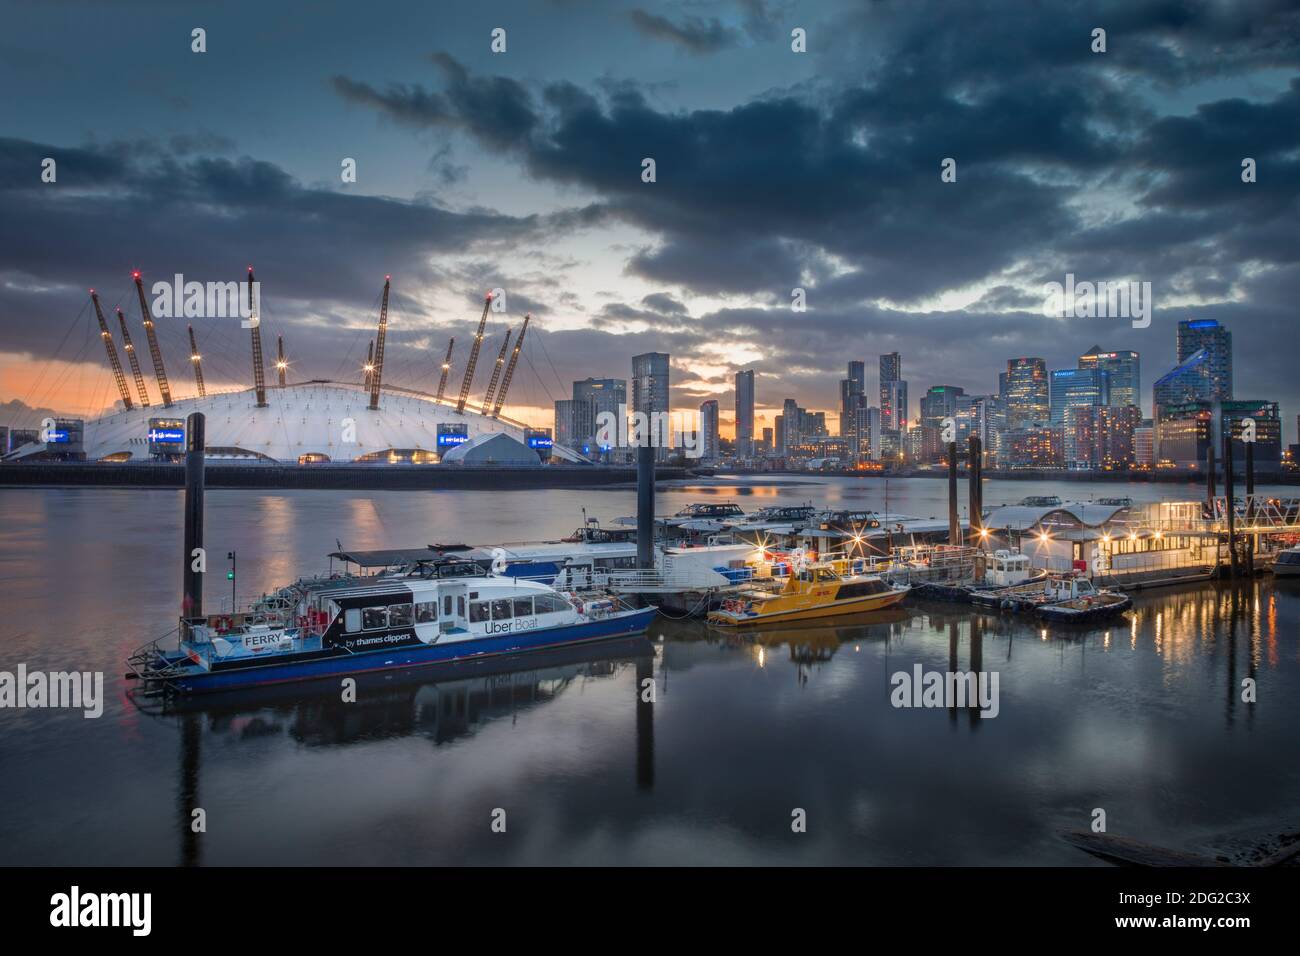 London, skyline of Docklands Canary Wharf commercial centre, O2 concert arena & events venue, river boats on the Thames, dusk, illuminated buildings Stock Photo